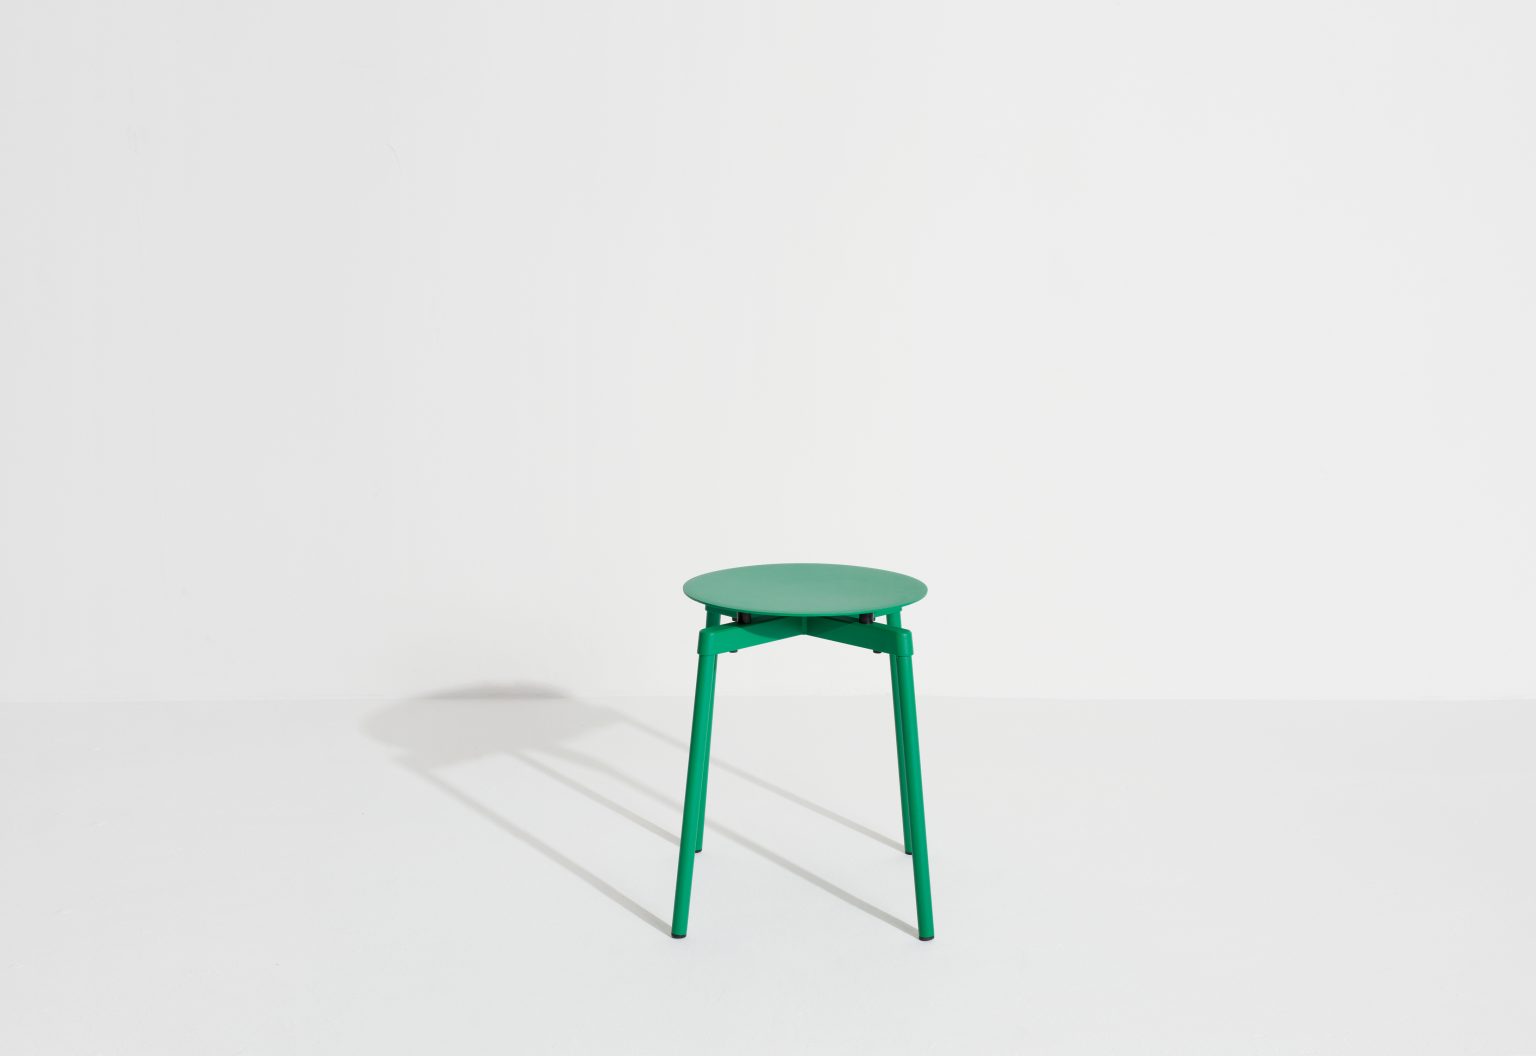 Biennale Interieur - Belgium's leading design and interior event - M0810503_fromme_stool_mintgreen_©pf_packshot_hd.jpg